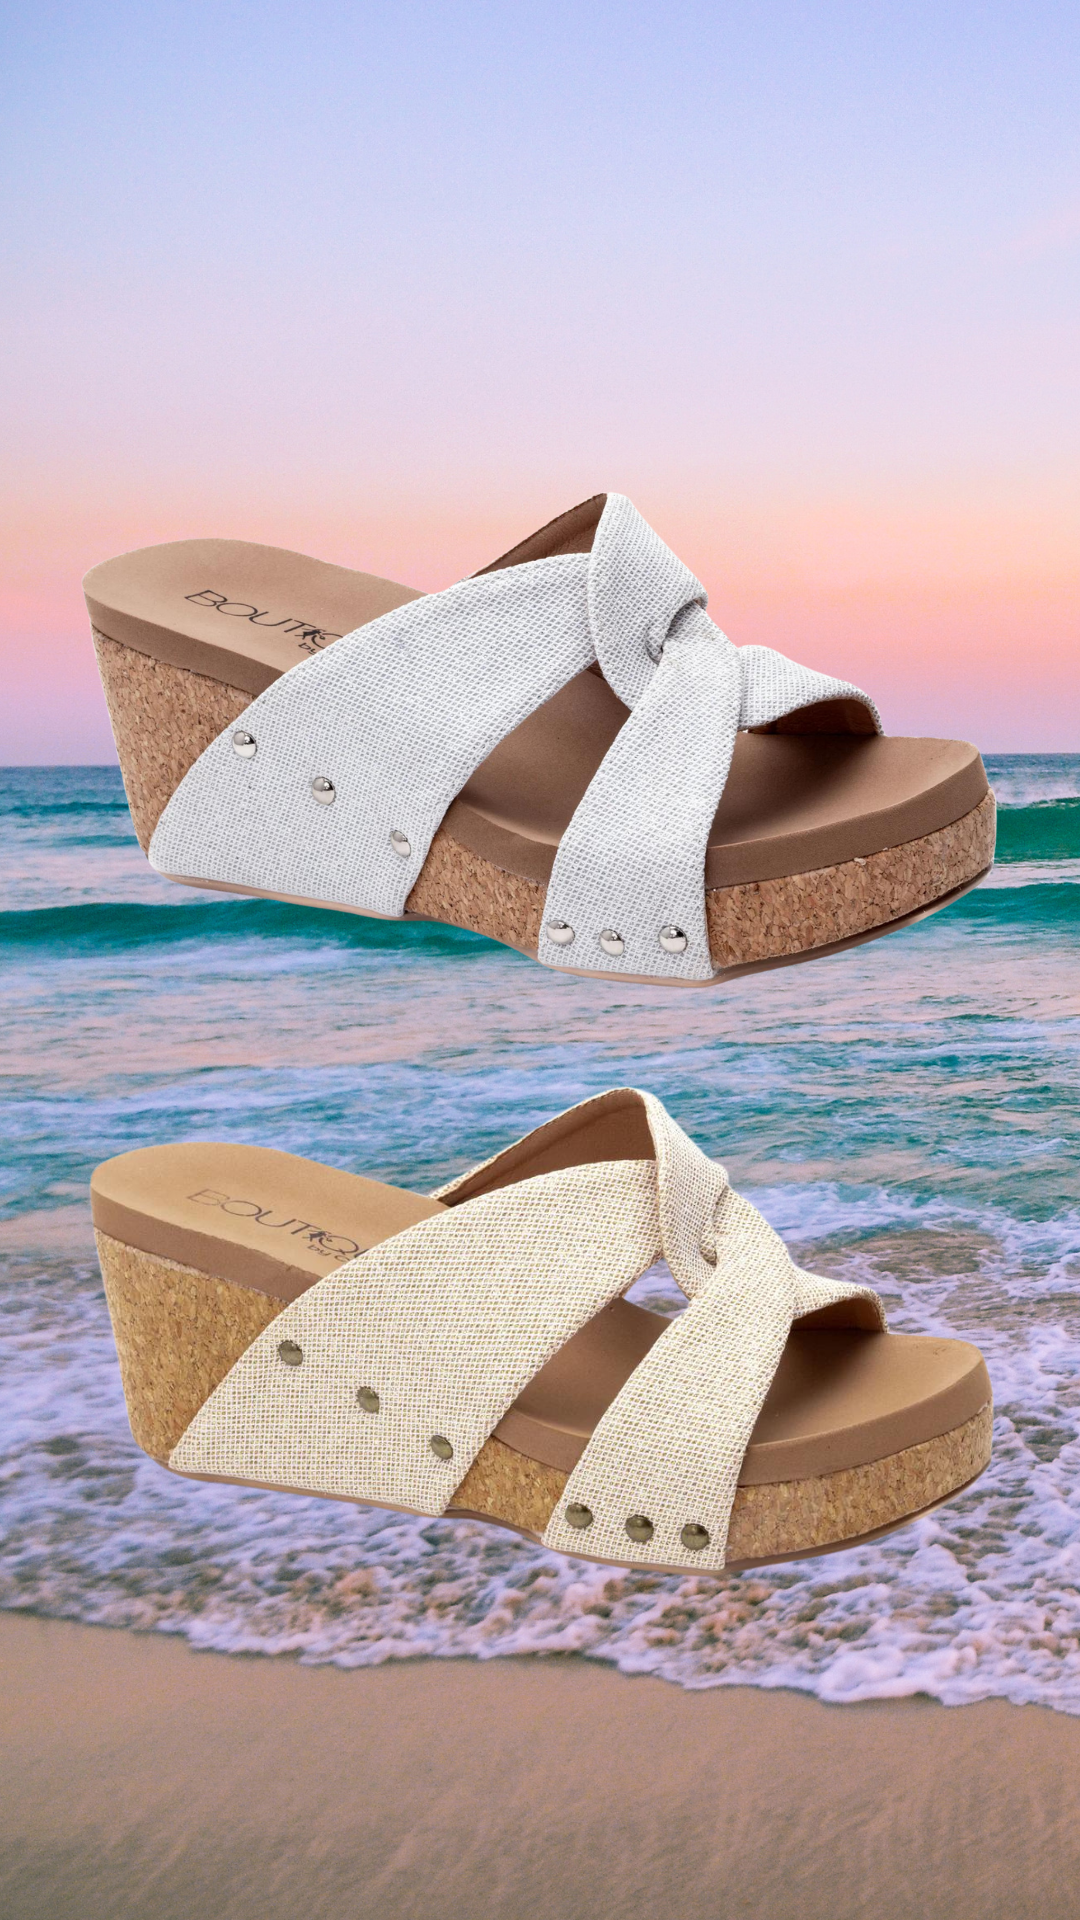 Market Live Preorder: Bonny Wedge by Corky’s (Ships in 2-3 Weeks)